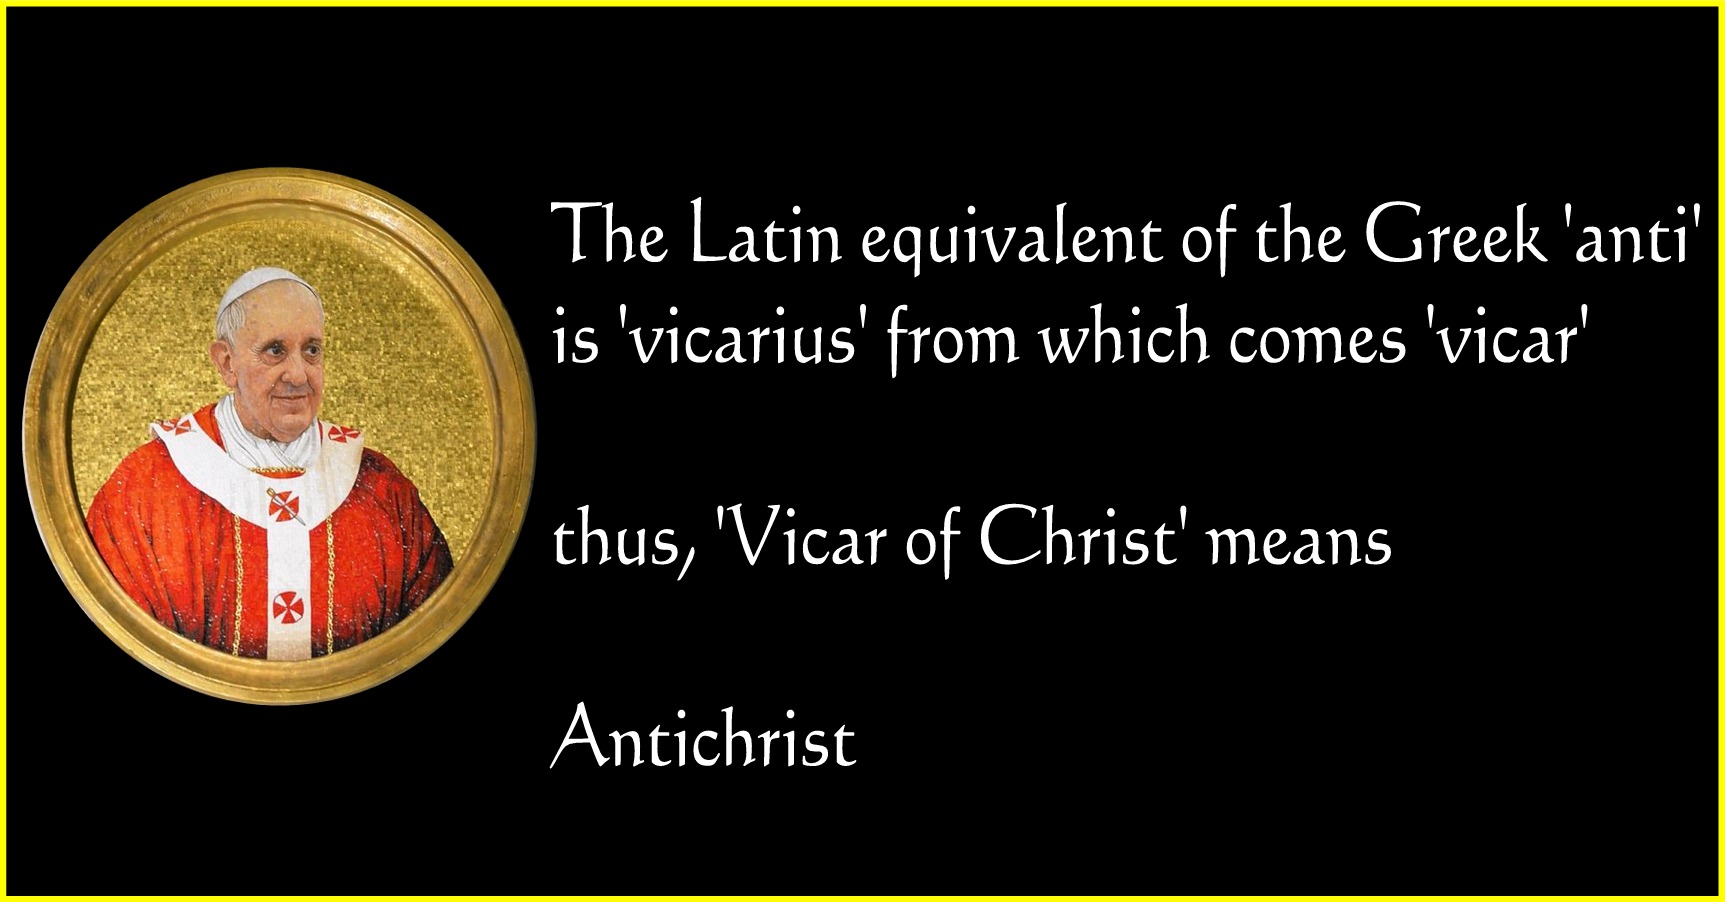 religion - The Latin equivalent of the Greek 'anti' is 'vicarius' from which comes 'vicar', thus, 'Vicar of Christ' means Antichrist